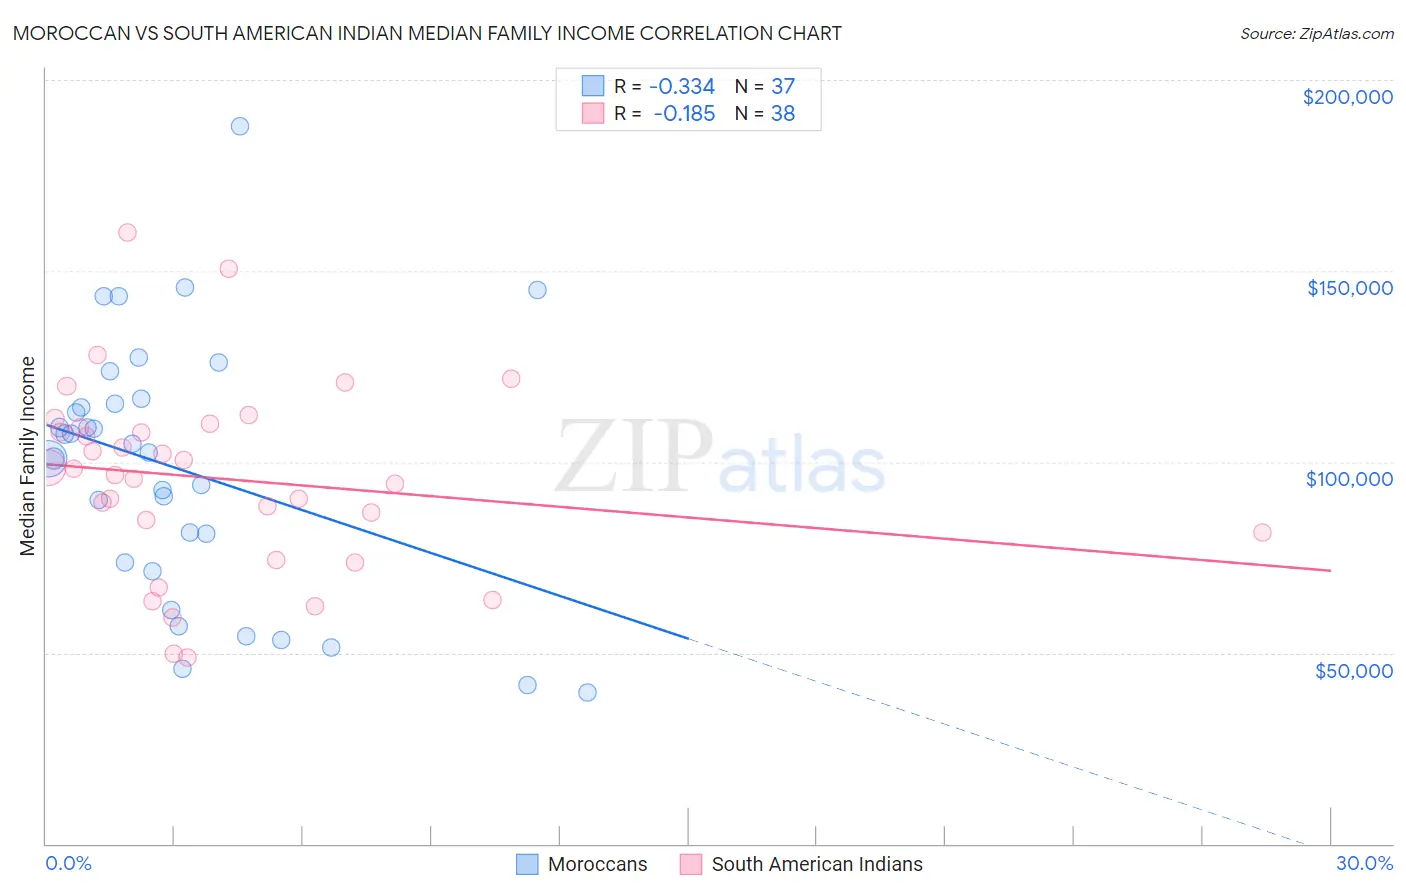 Moroccan vs South American Indian Median Family Income